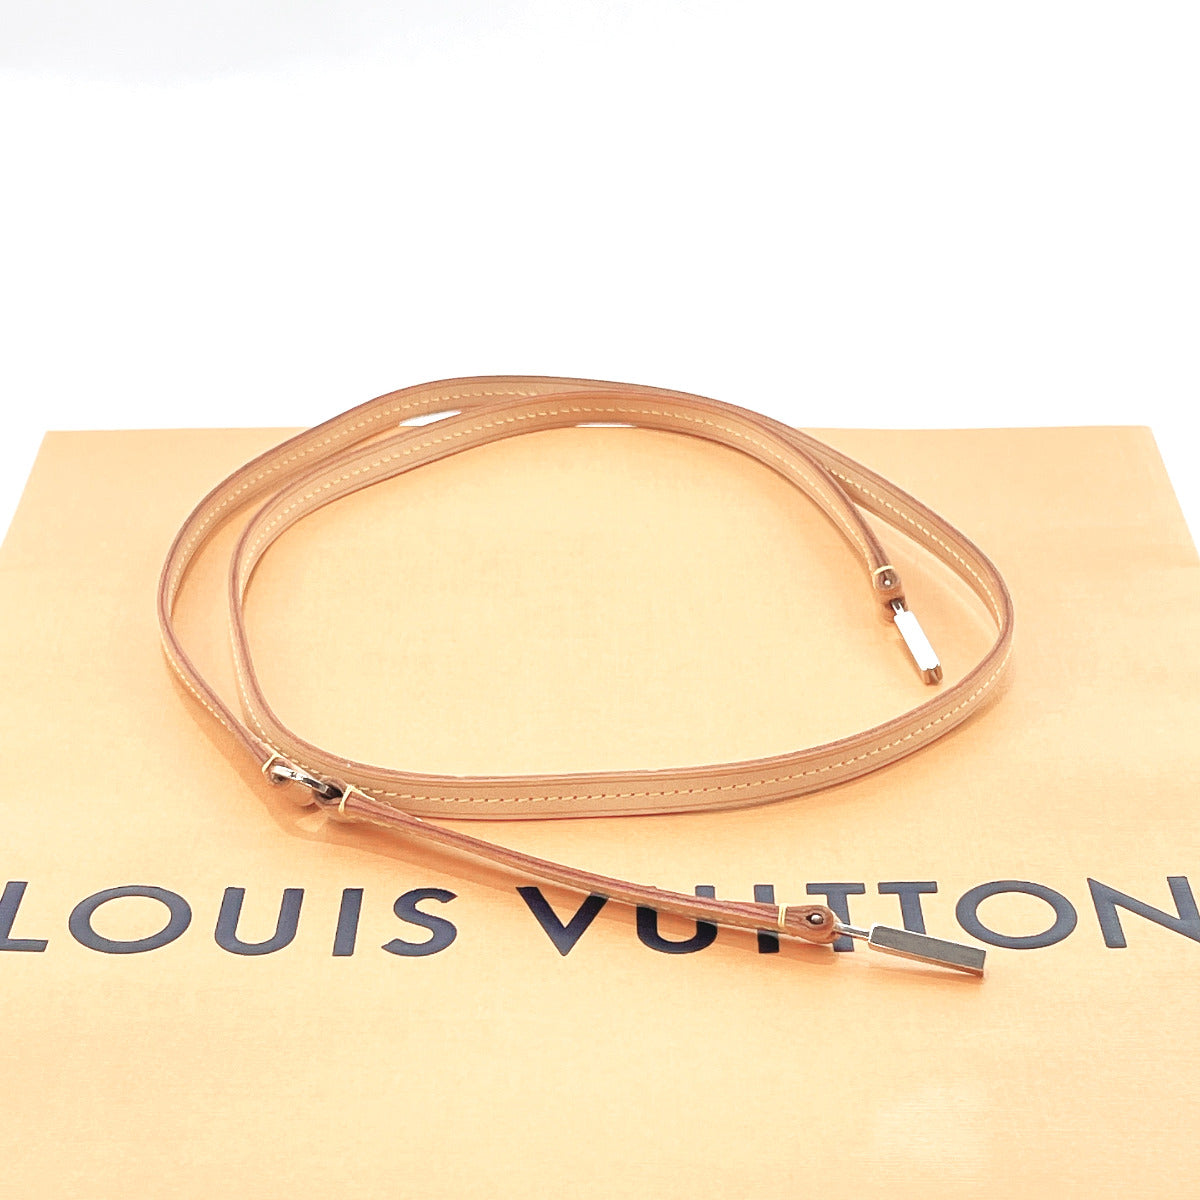 Louis Vuitton Bandouliere 120 Leather Other J00145 in Good condition